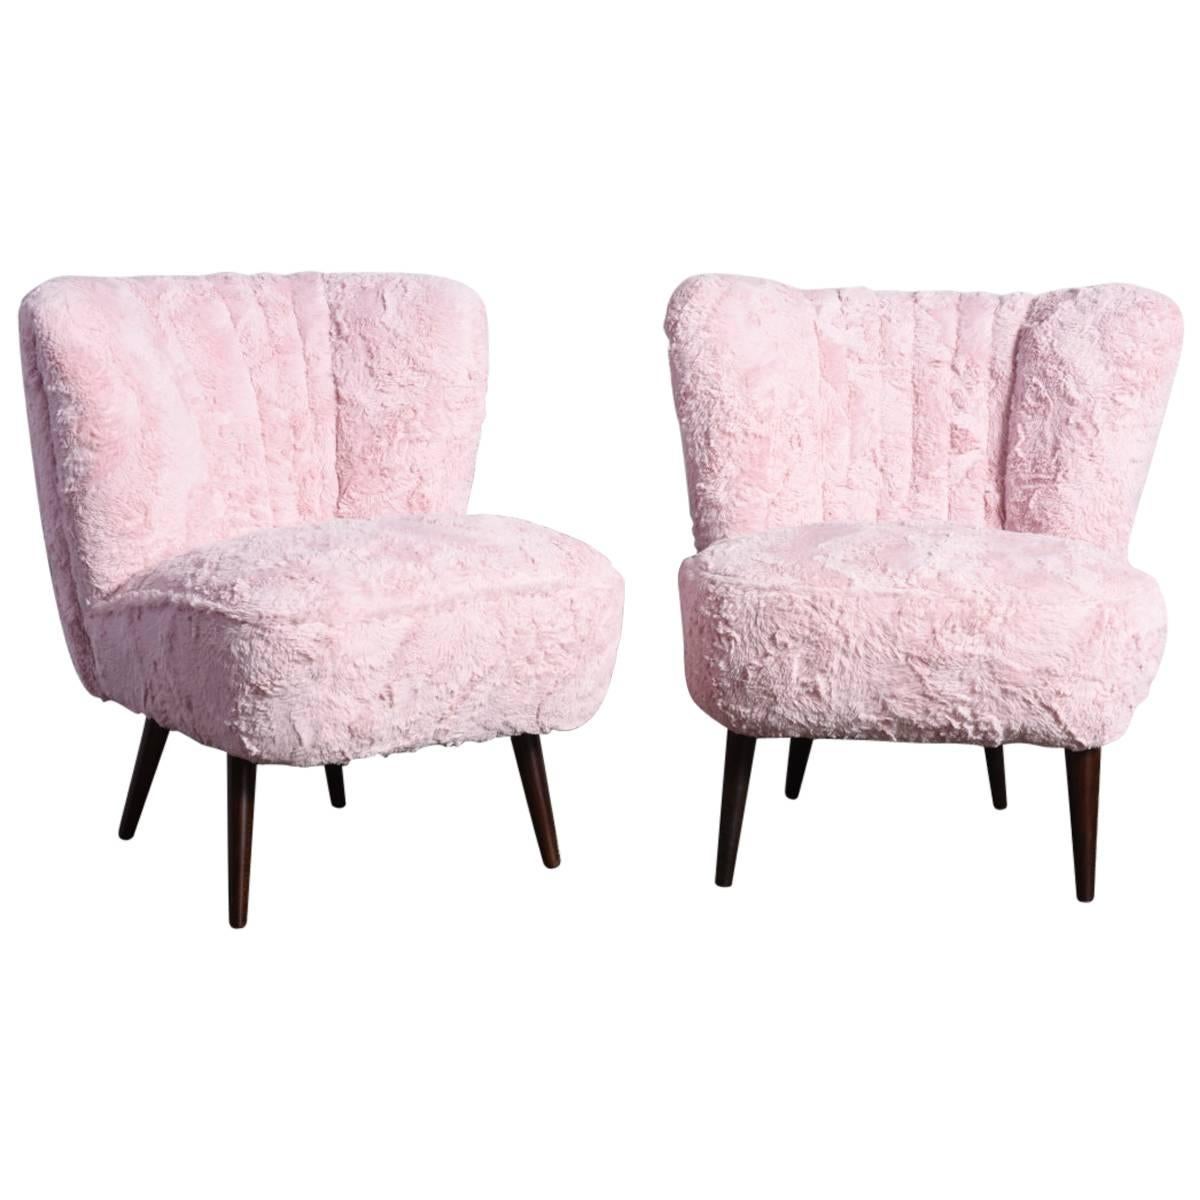 Pair of Cocktail Chairs Faux Fur